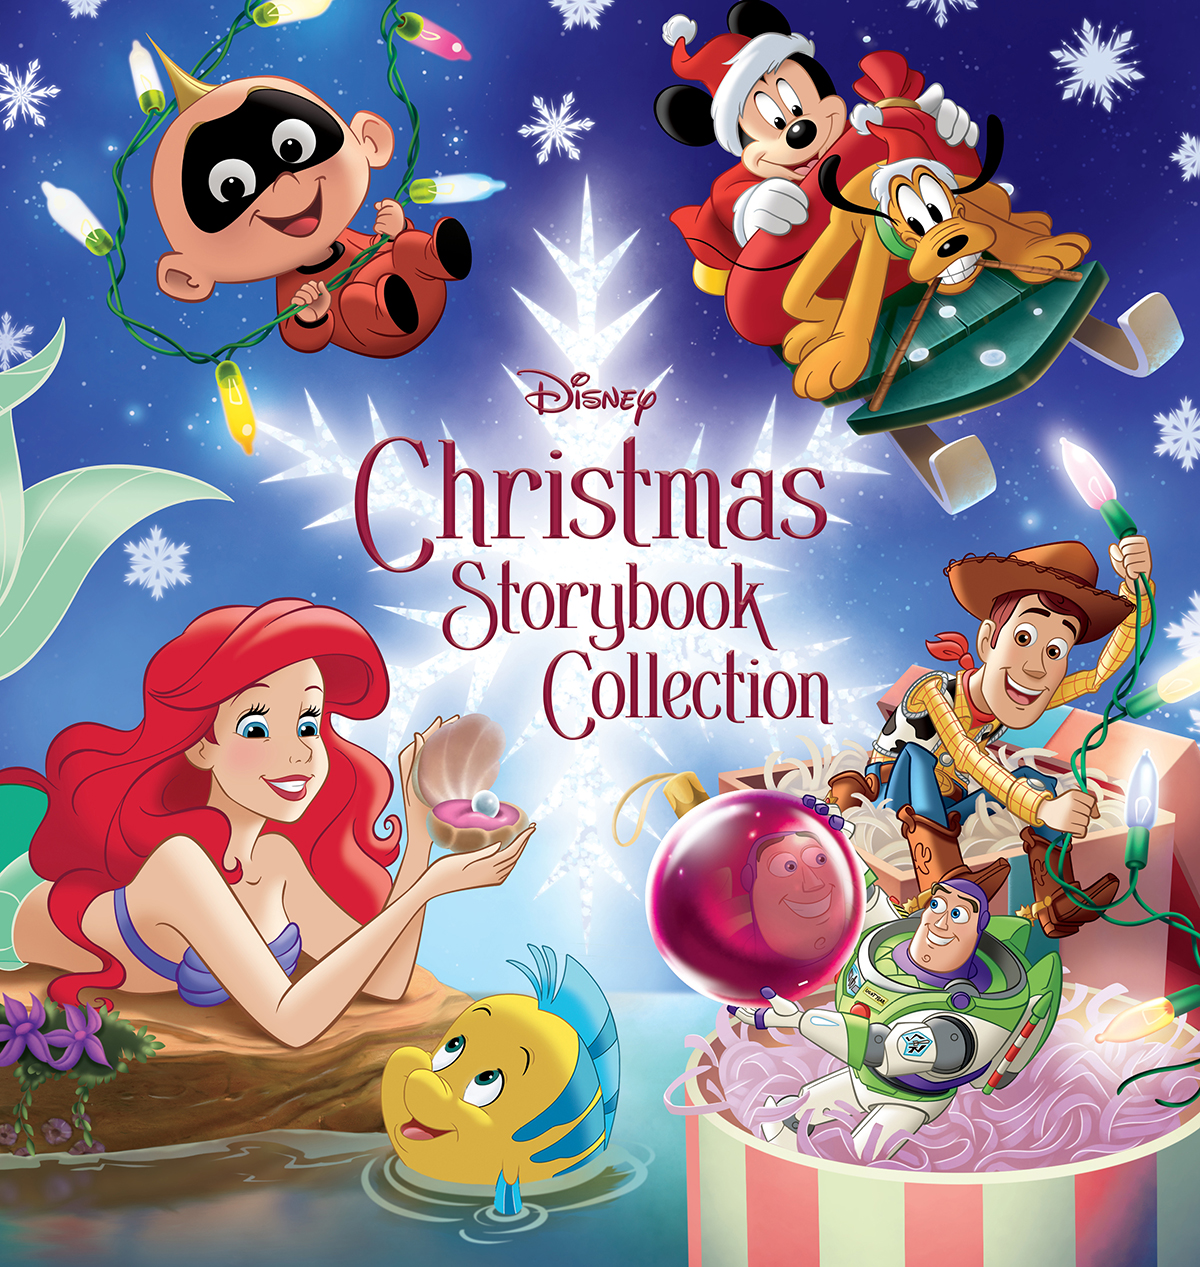 Disney Christmas Storybook Collection by Disney Book Group Disney Storybook  Art Team - Disney Books